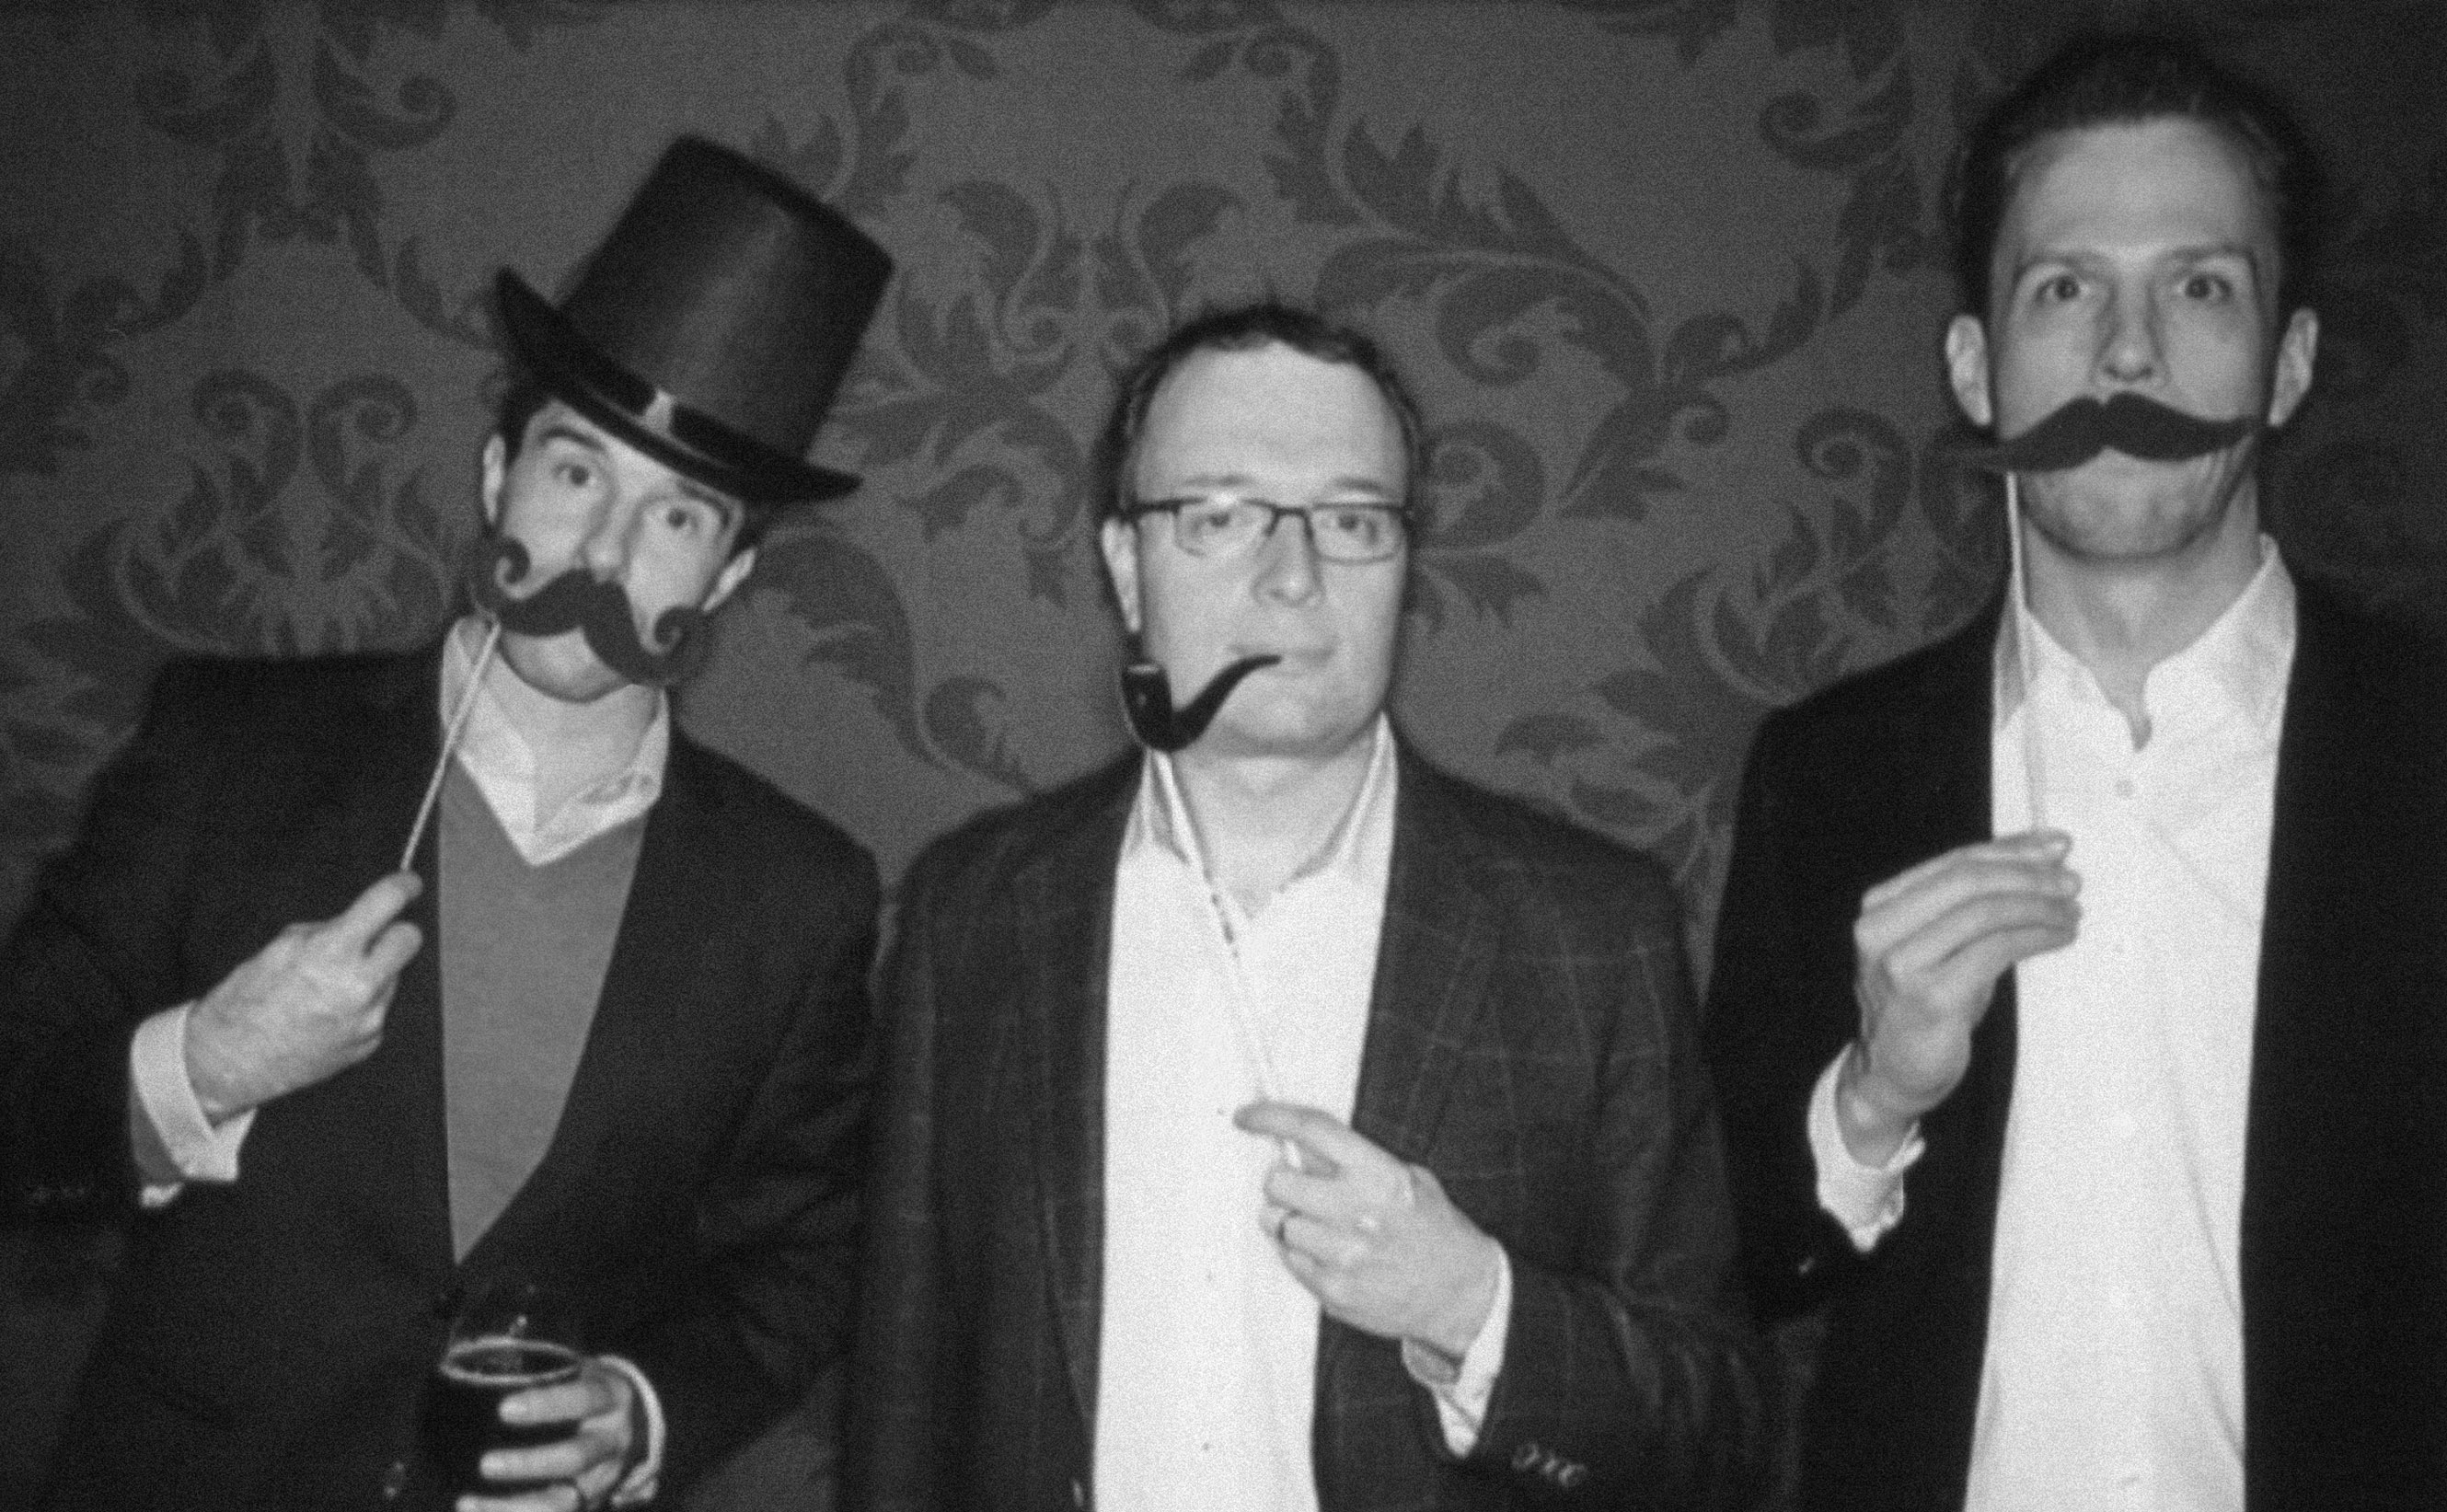 Marley Natural Website & Social Campaign Wins ADDYs: Blake, Ian & Colin at the at Seattle's 2015 ADDYs Photobooth, Shot 2